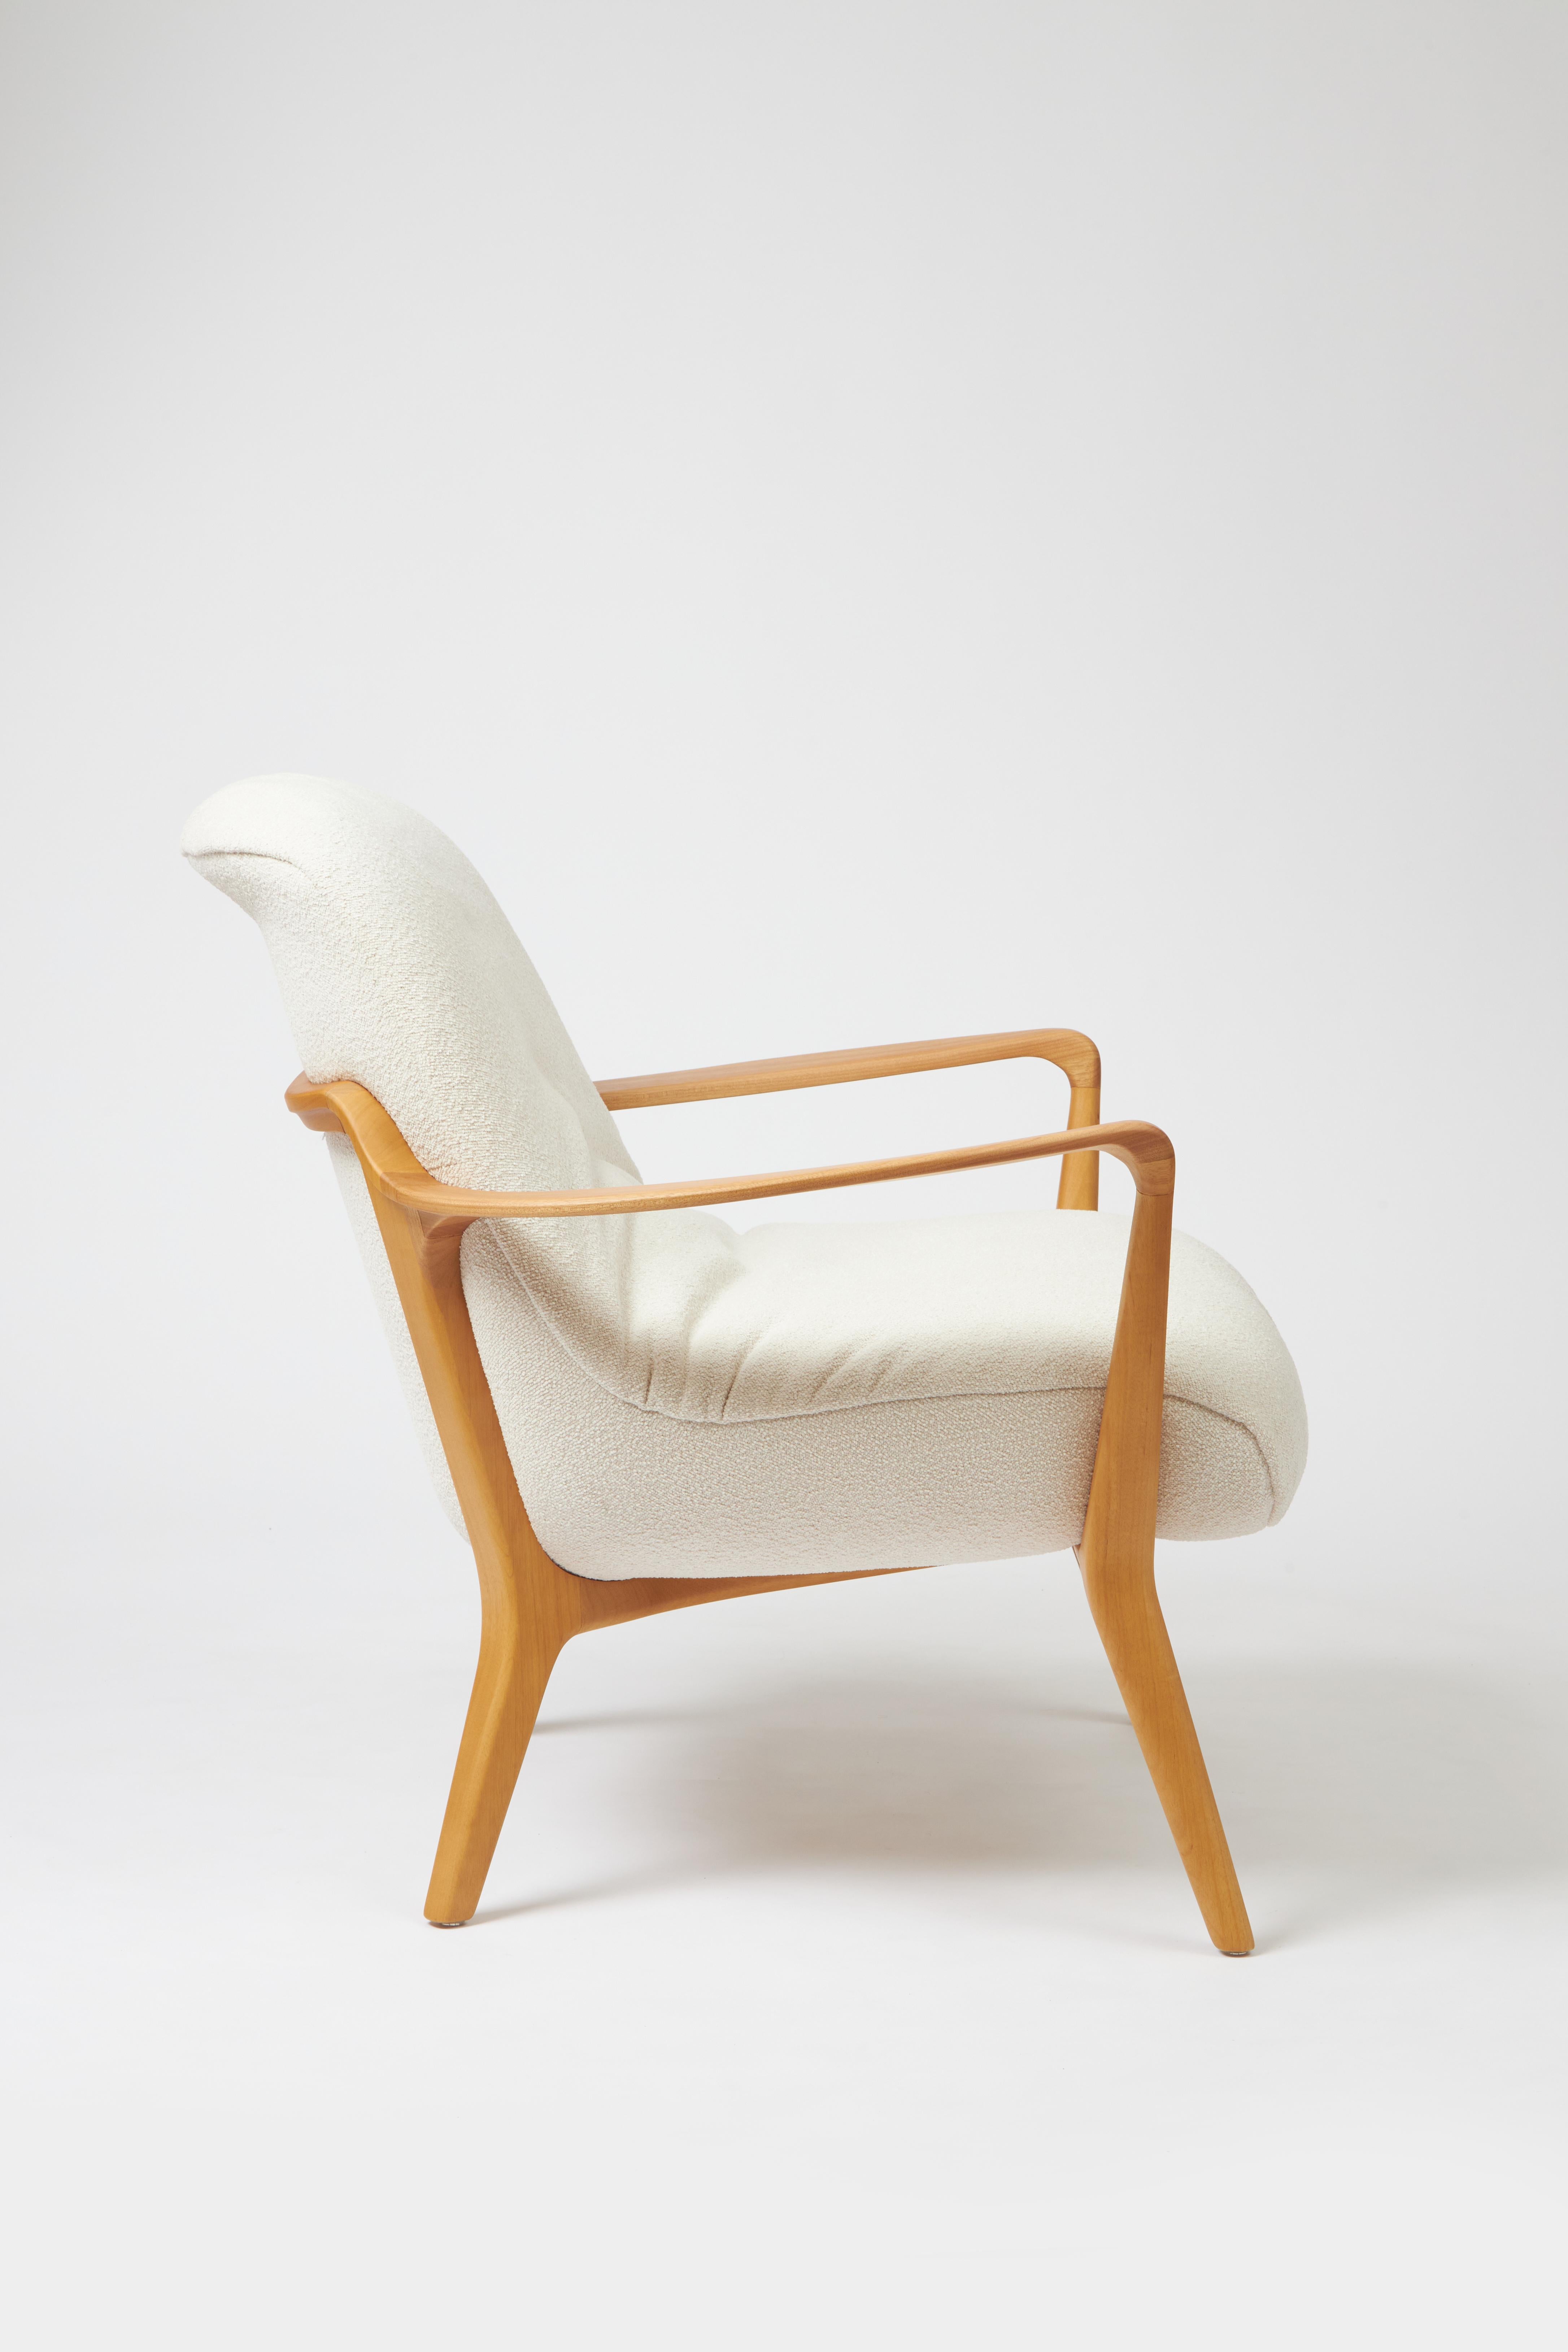 Post-Modern Minimal Style Insigne Armchair Sculpted in solid wood, textiles seating For Sale